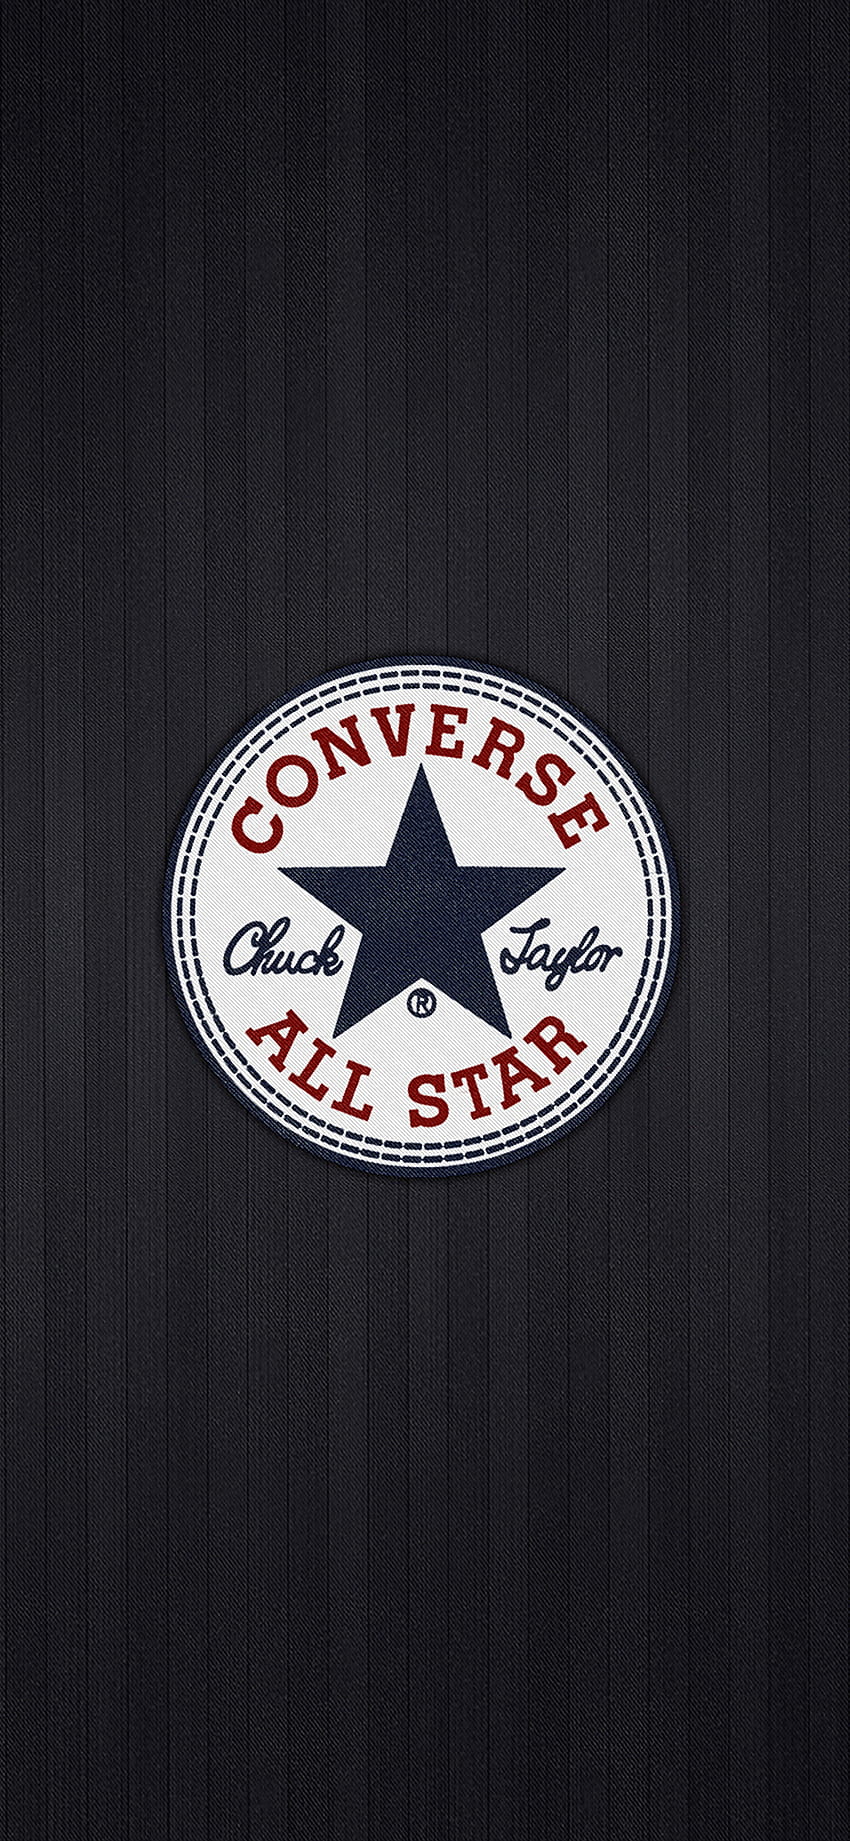 Converse all star logo iPhone X, brands and logos iphone x HD phone wallpaper